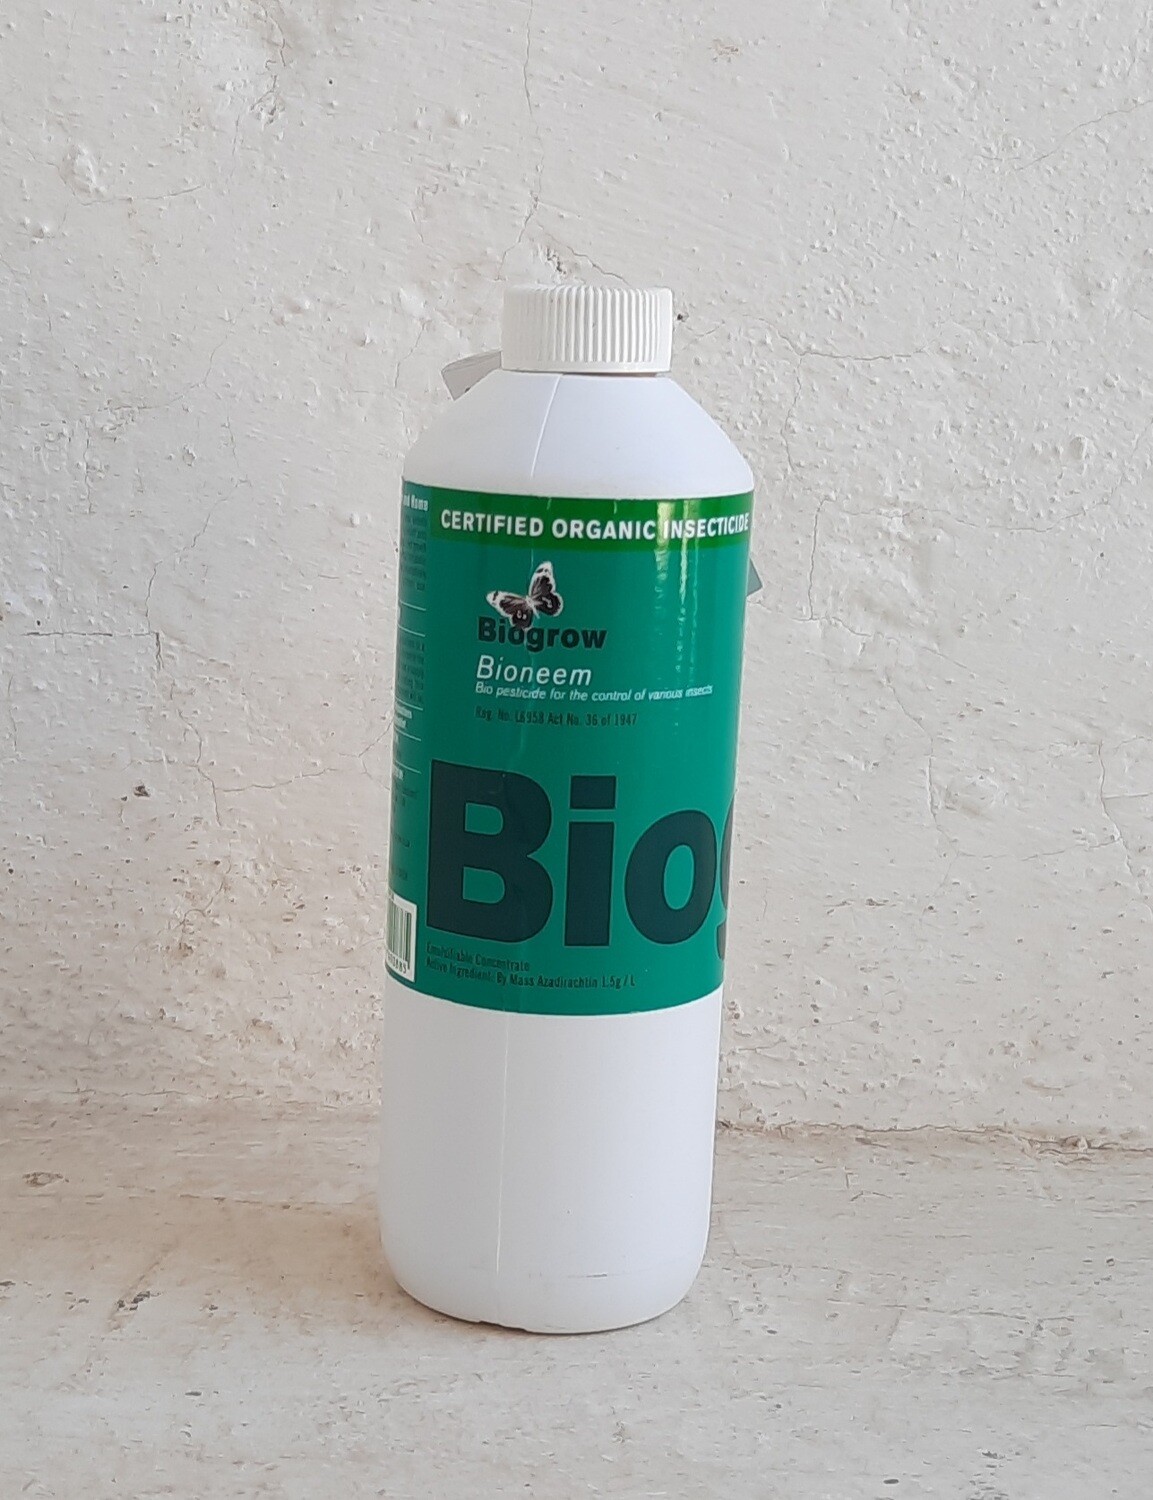 Biogrow Bioneem Bio pesticide for the control of various insects 500ml